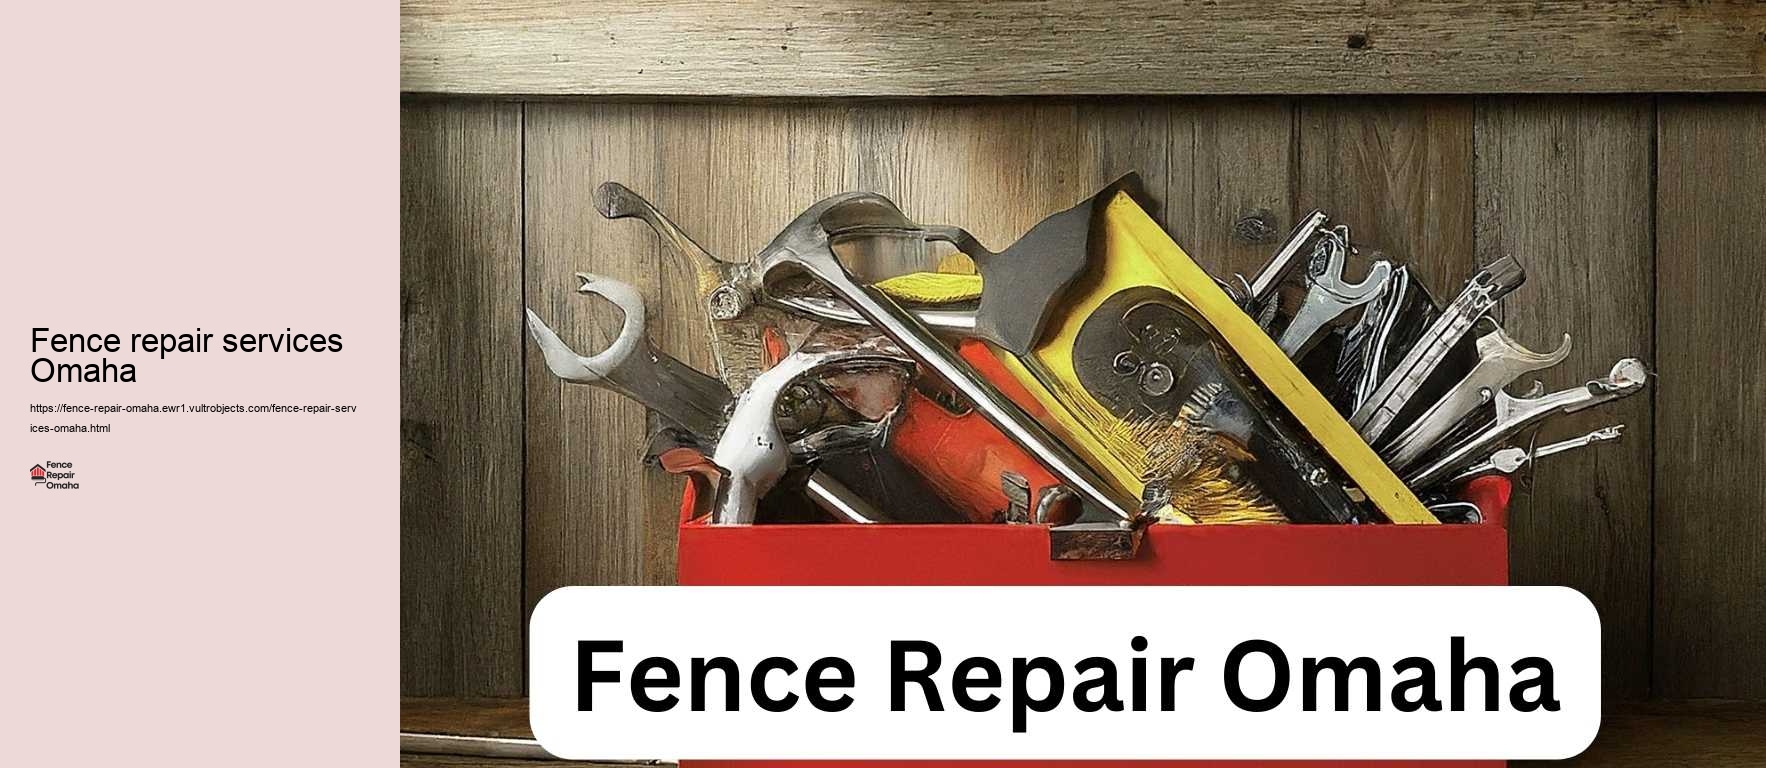 Fence repair services Omaha